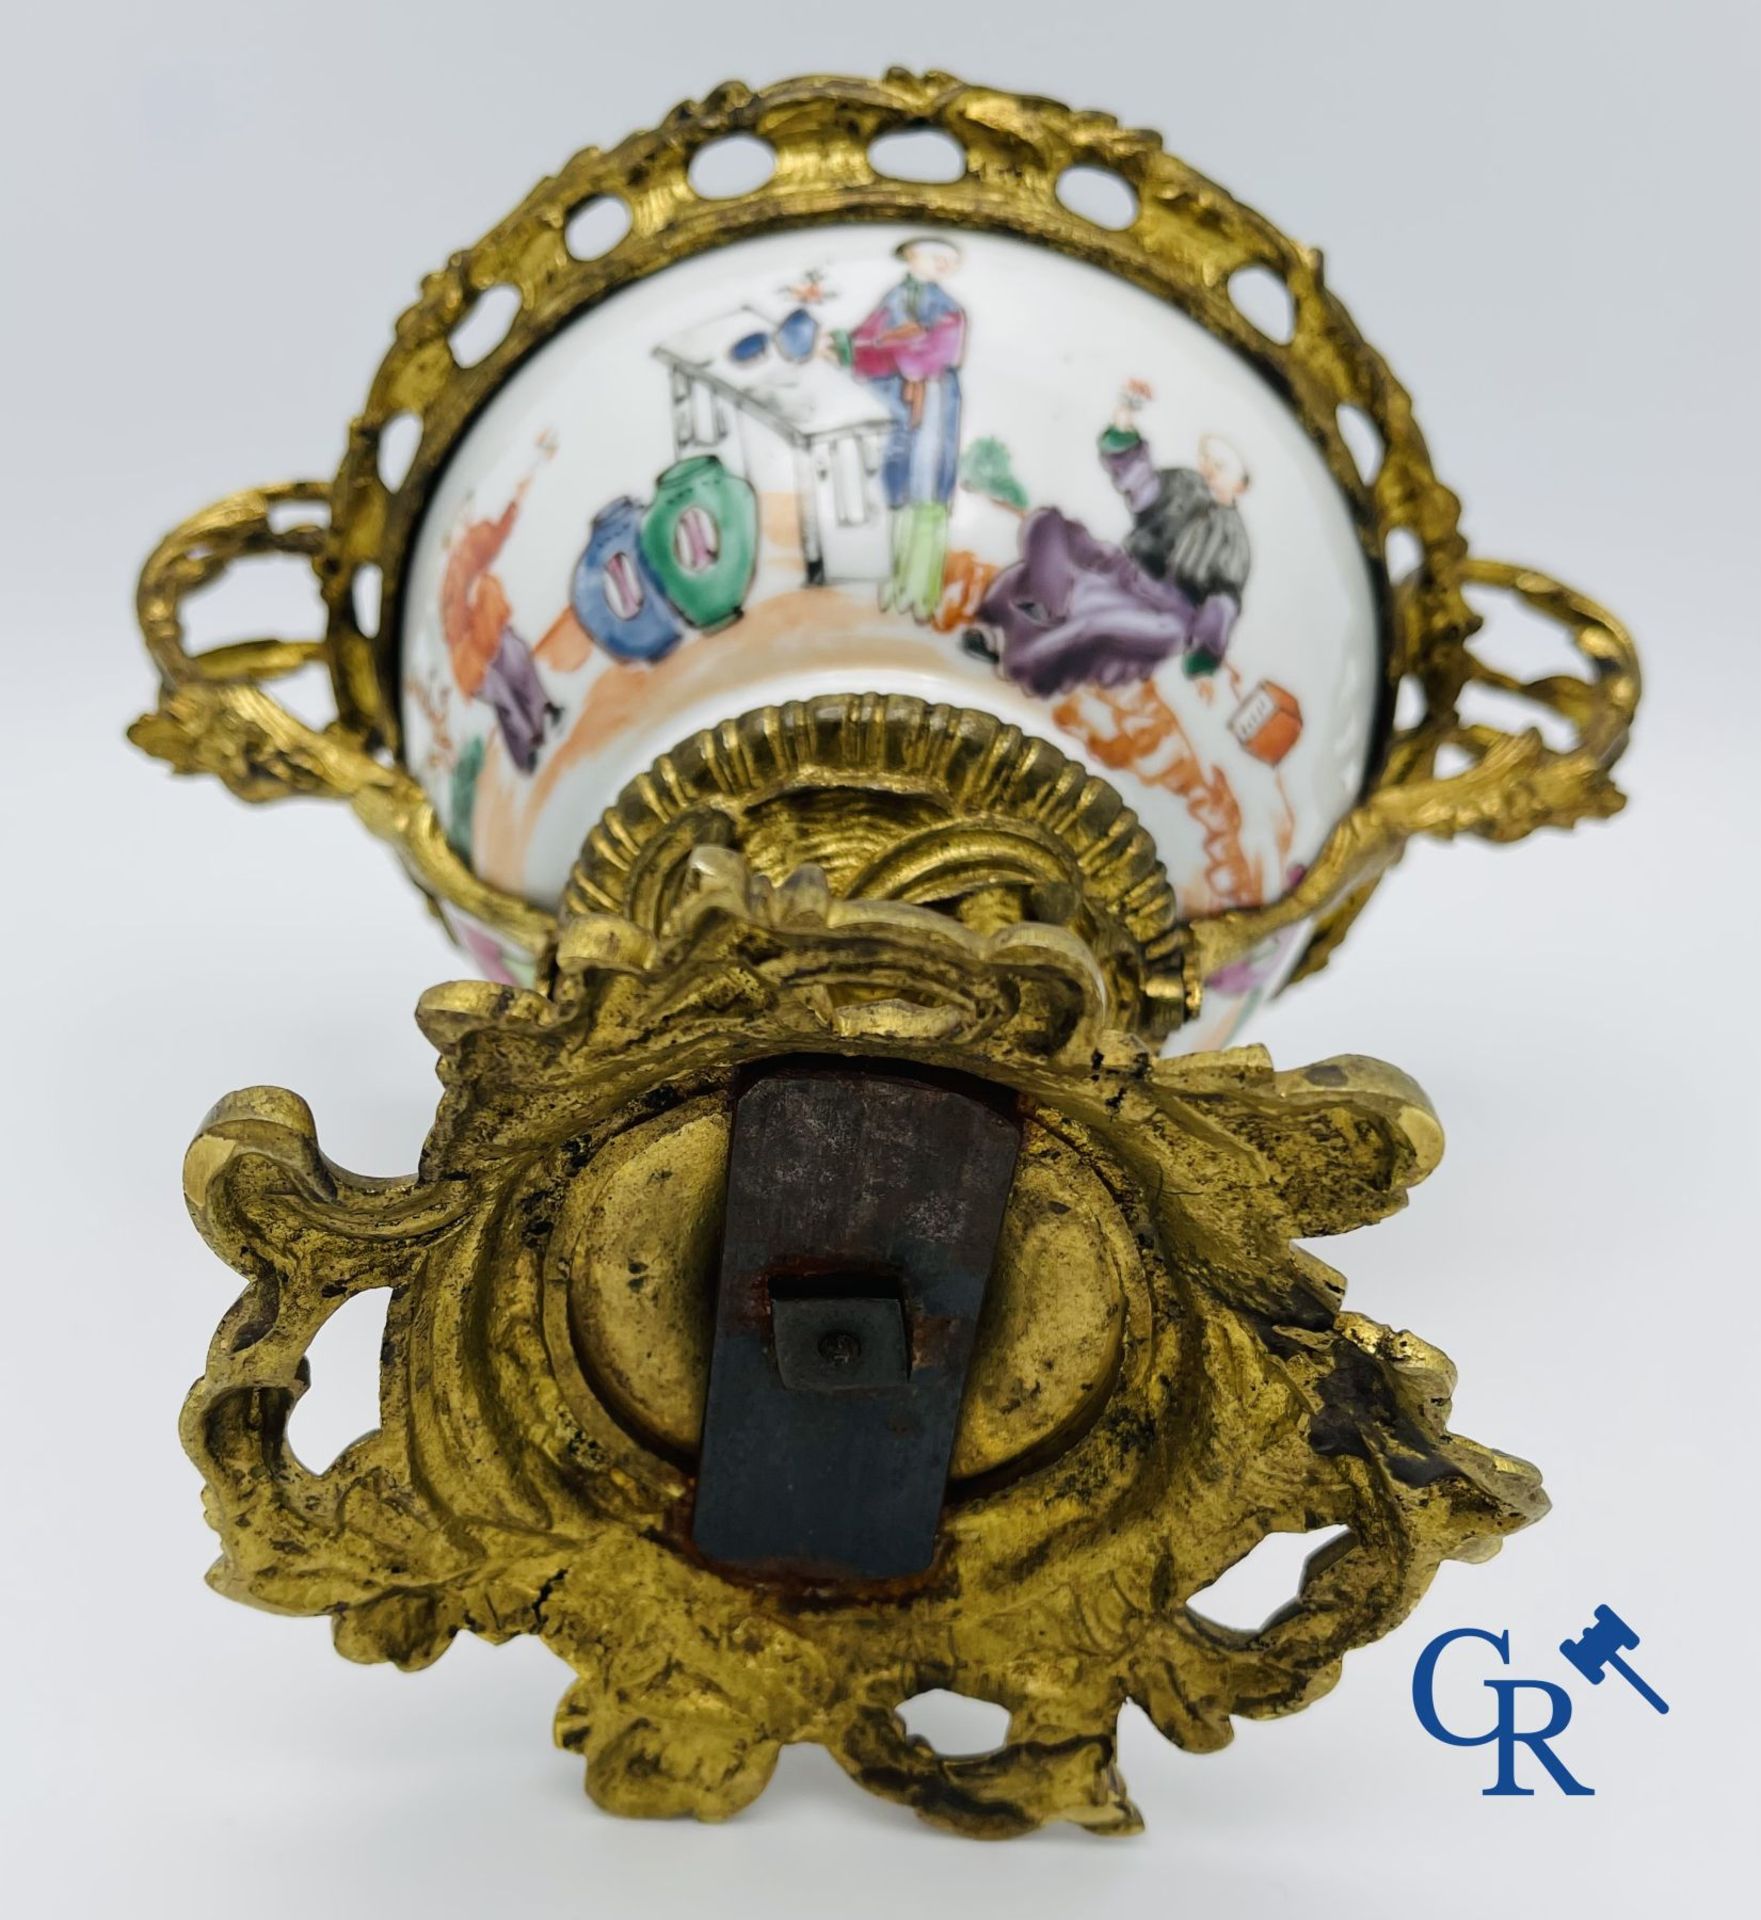 Chinese porcelain: An 18th century gilt-bronze mounted bowl in Chinese export porcelain. - Image 13 of 13